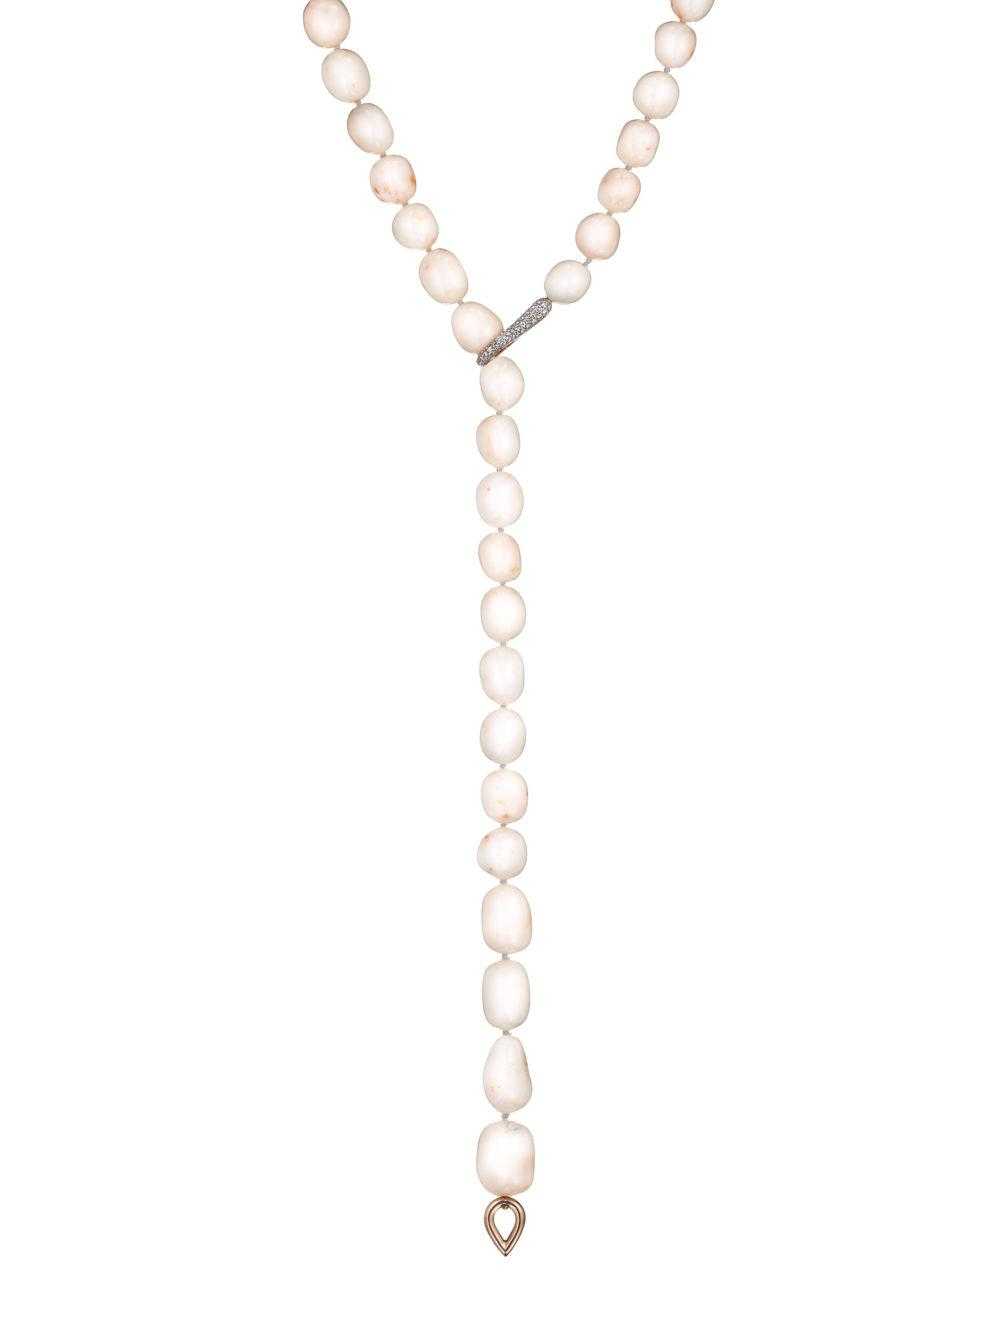 coral-lariat-necklace-high-end-jewelry-luxury-jewelry-hammerman-jewels